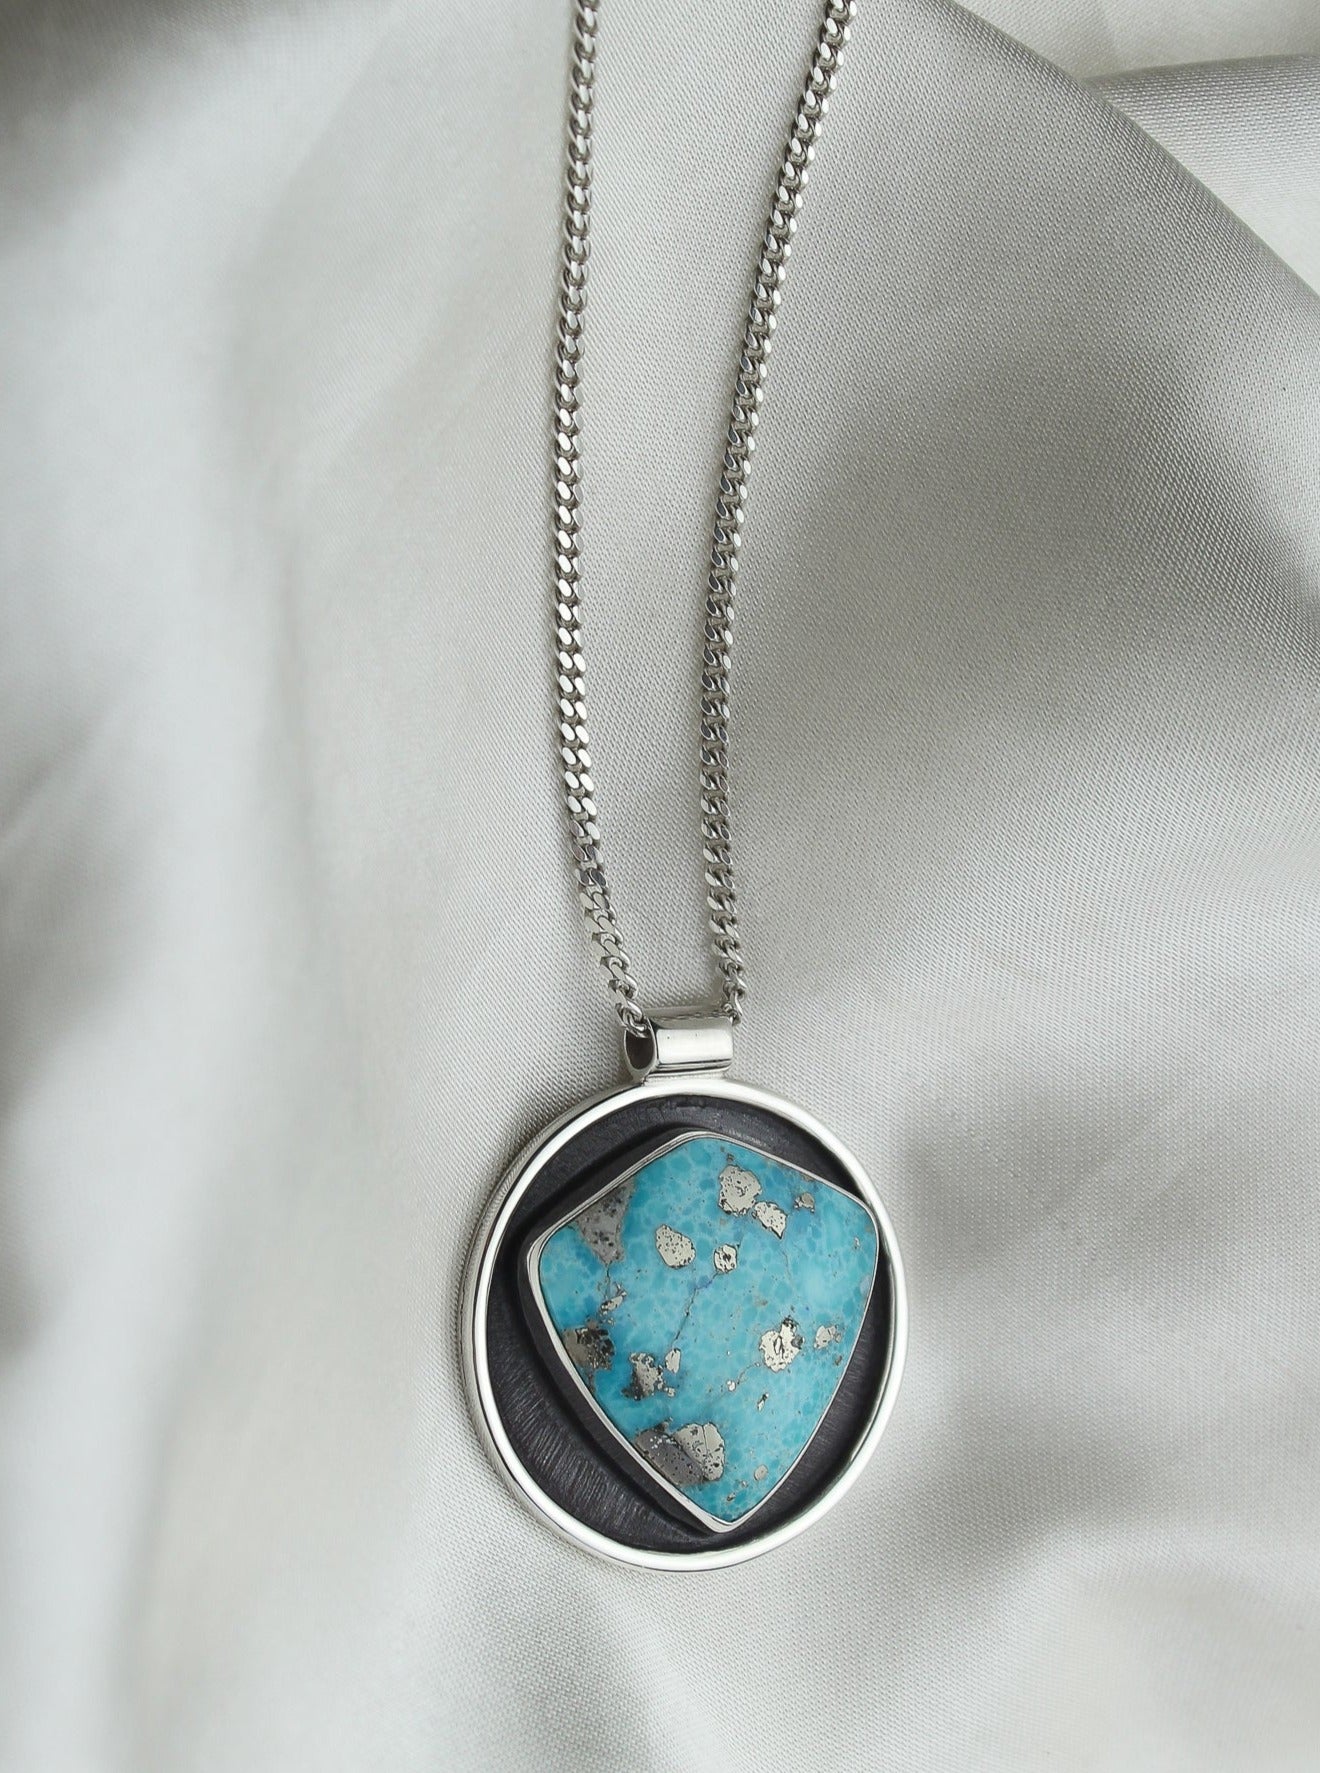 Handmade 925 sterling silver circular pendant with shield shaped white water turquoise stone with pyrite inclusions lily and William jewelry